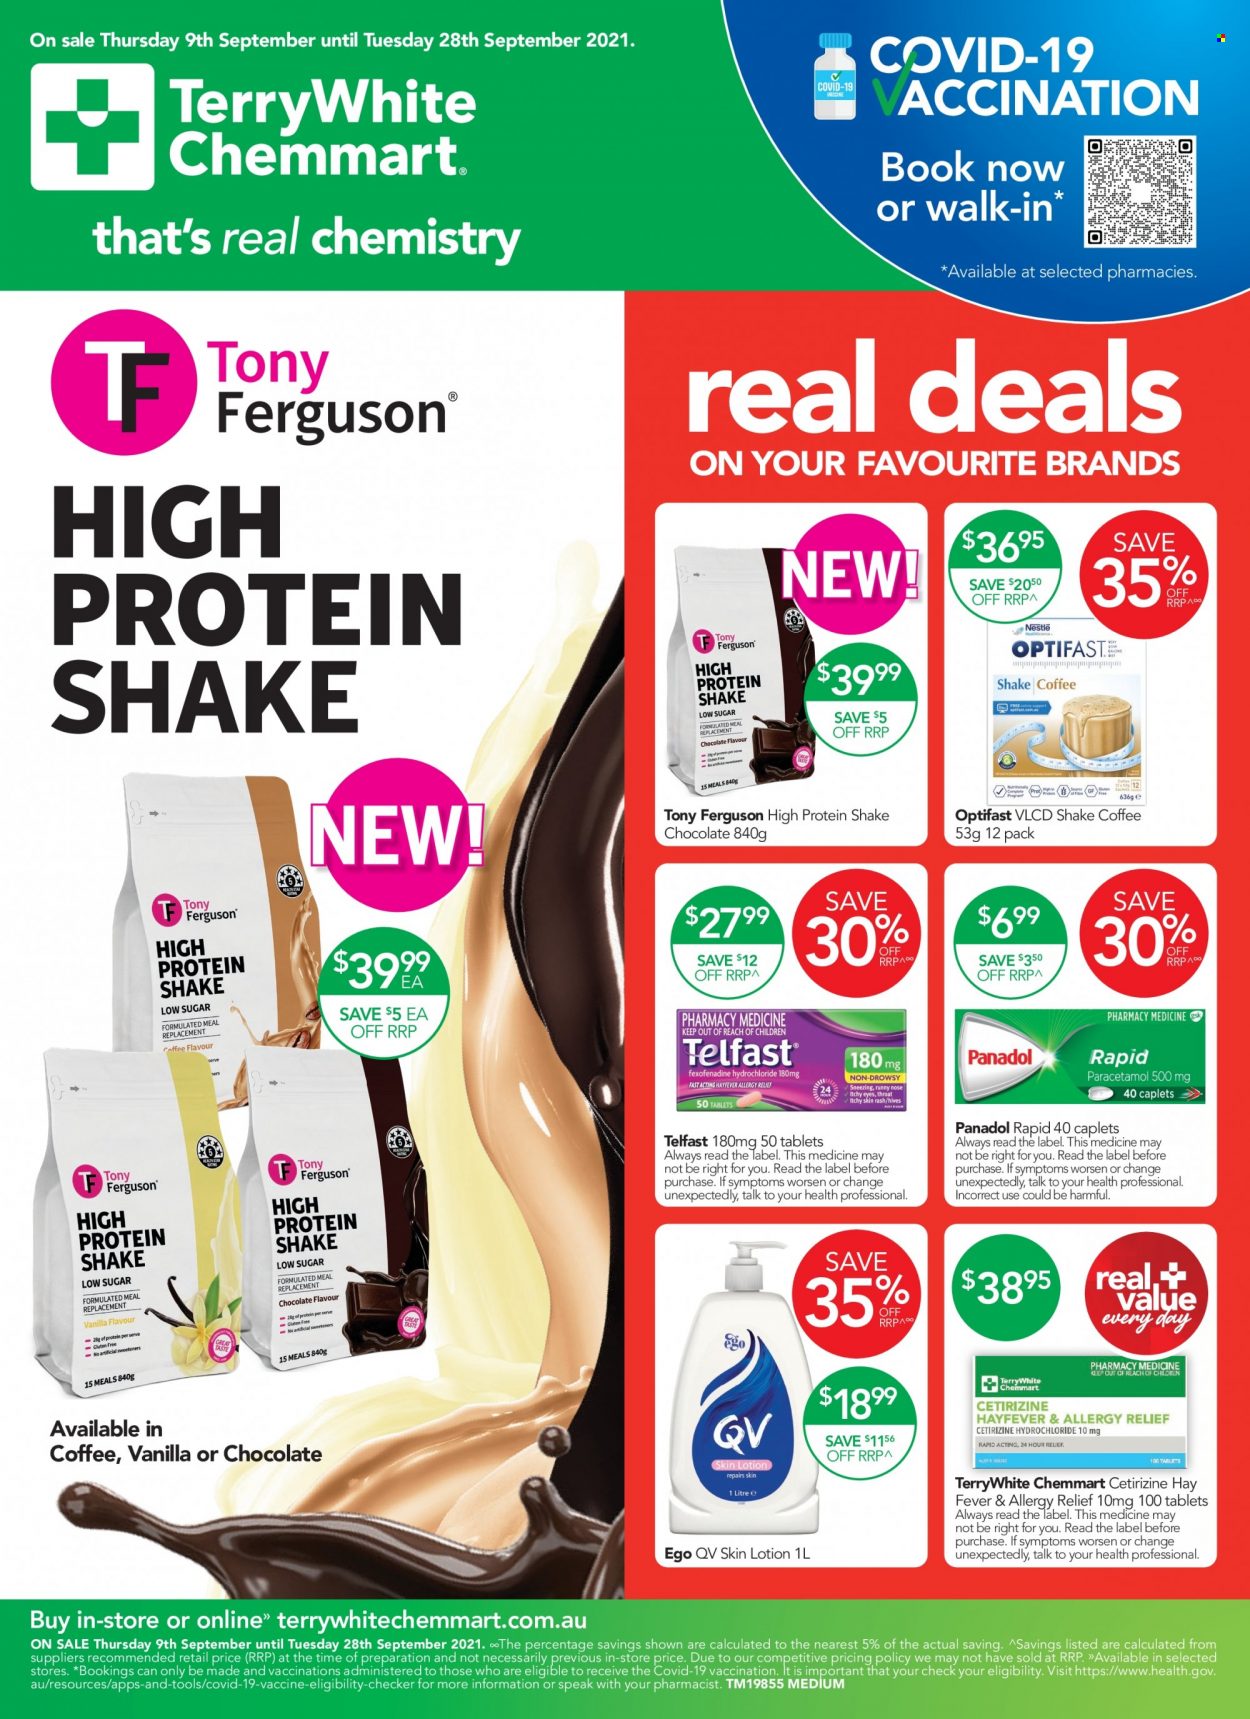 thumbnail - TerryWhite Chemmart Catalogue - 9 Sep 2021 - 28 Sep 2021 - Sales products - body lotion, allergy relief, Telfast. Page 1.